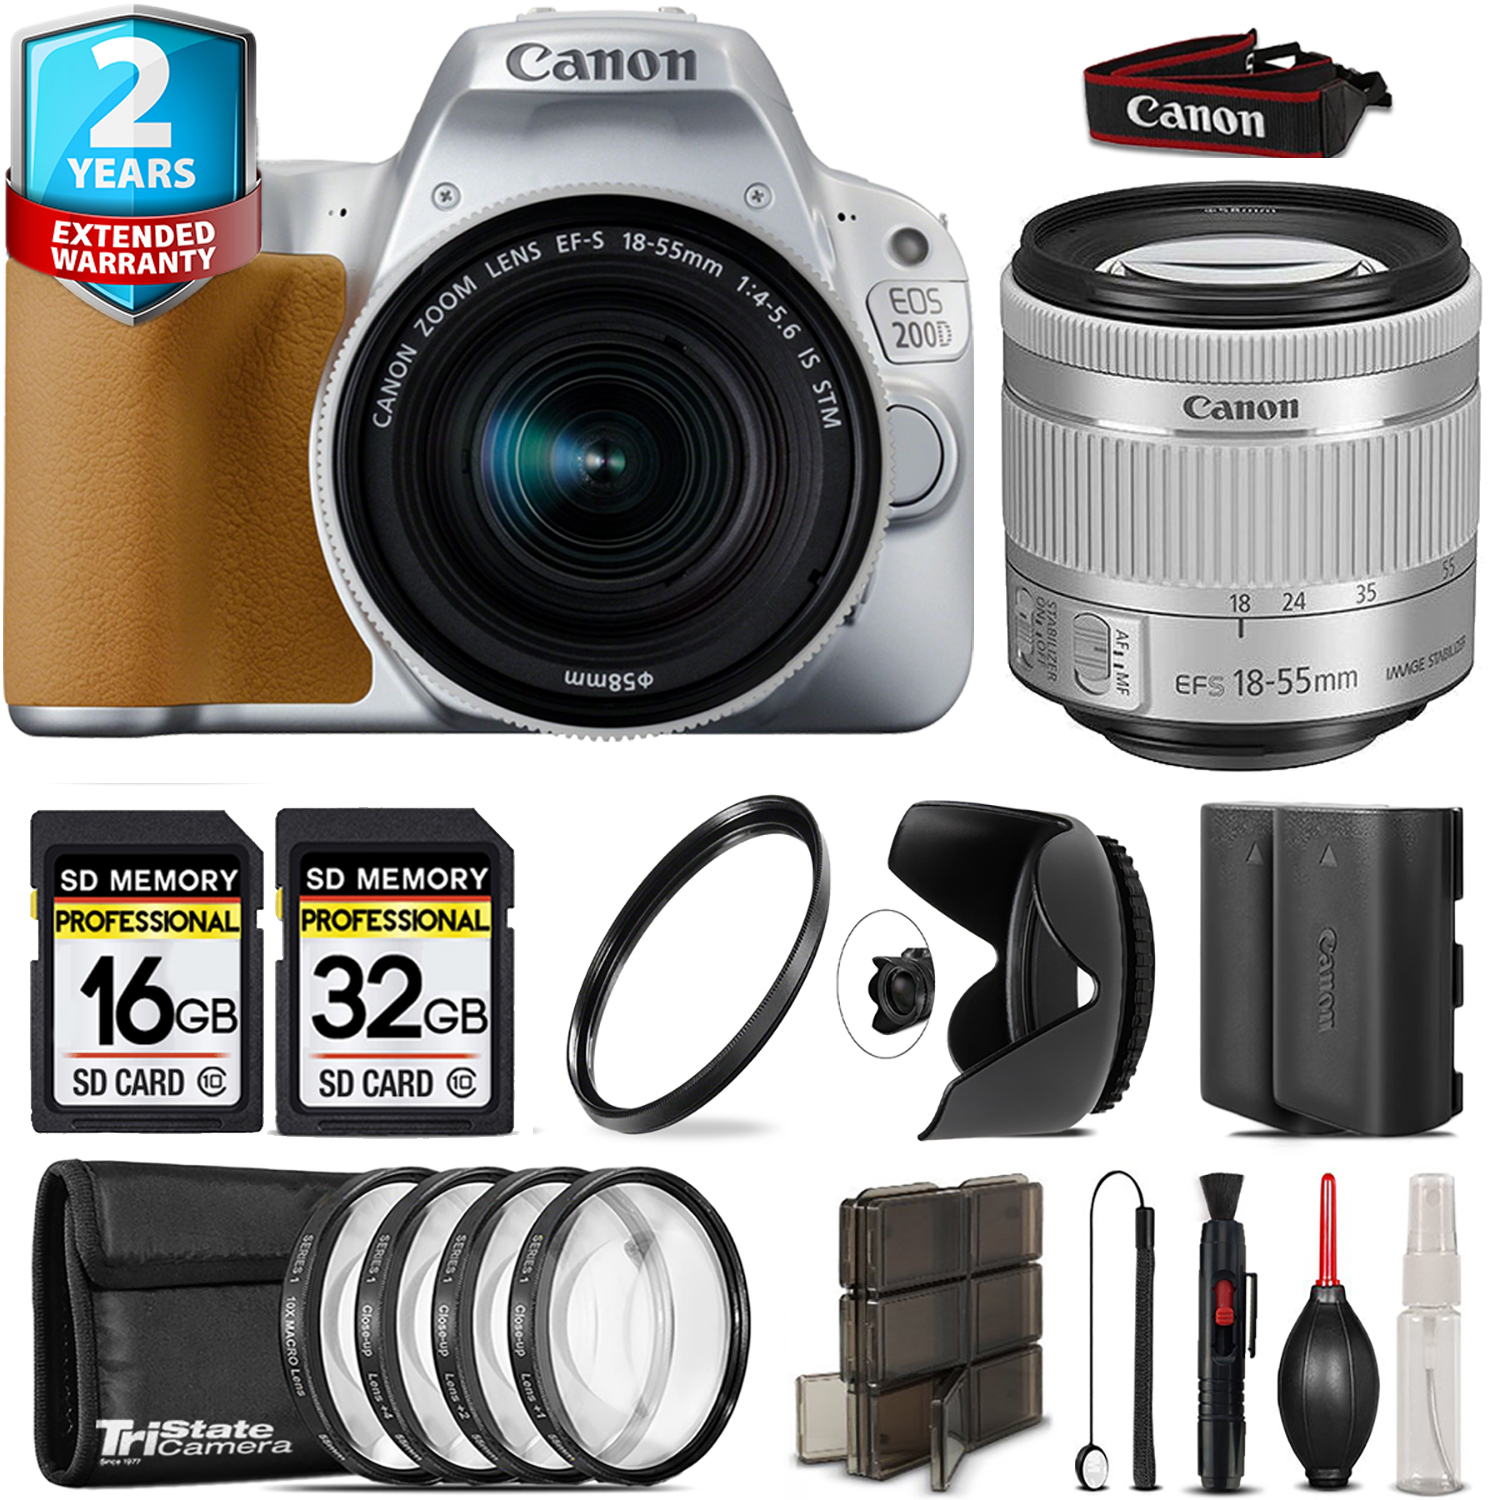 EOS Rebel 200D Camera (Silver) + 18-55mm IS STM + 4 Piece Macro Set + 48GB *FREE SHIPPING*